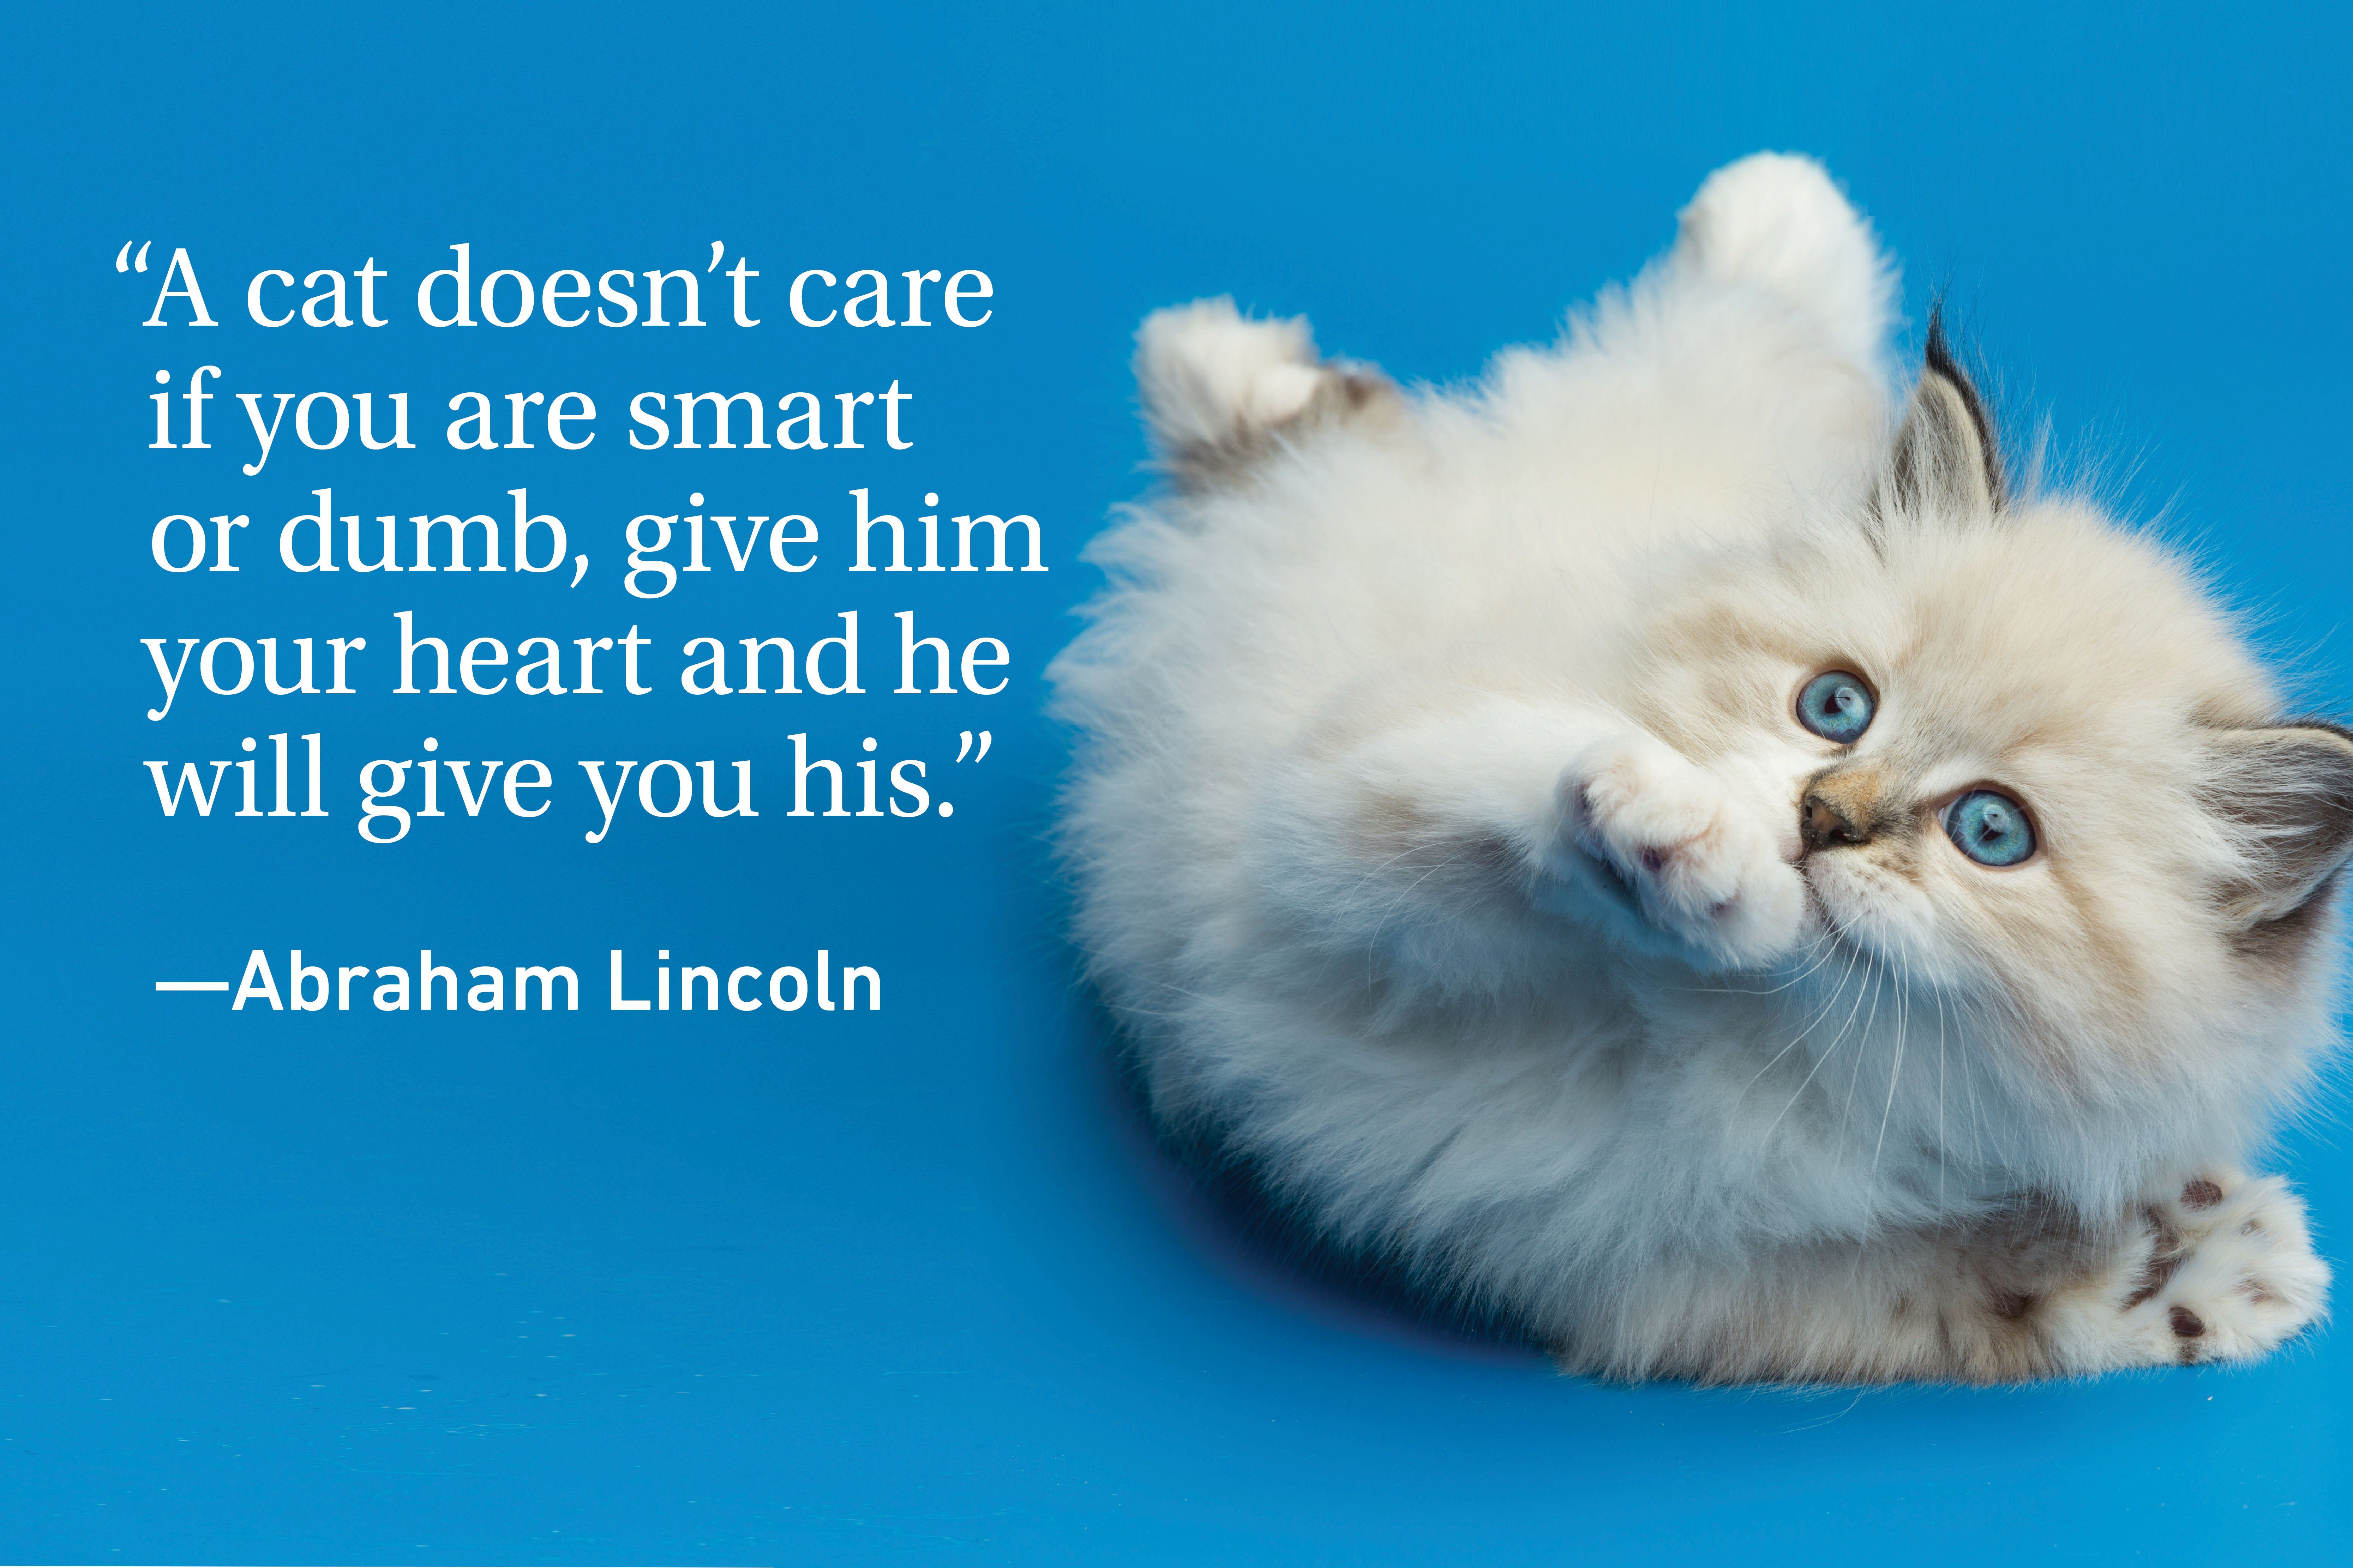 Quote on blue background with a kitten